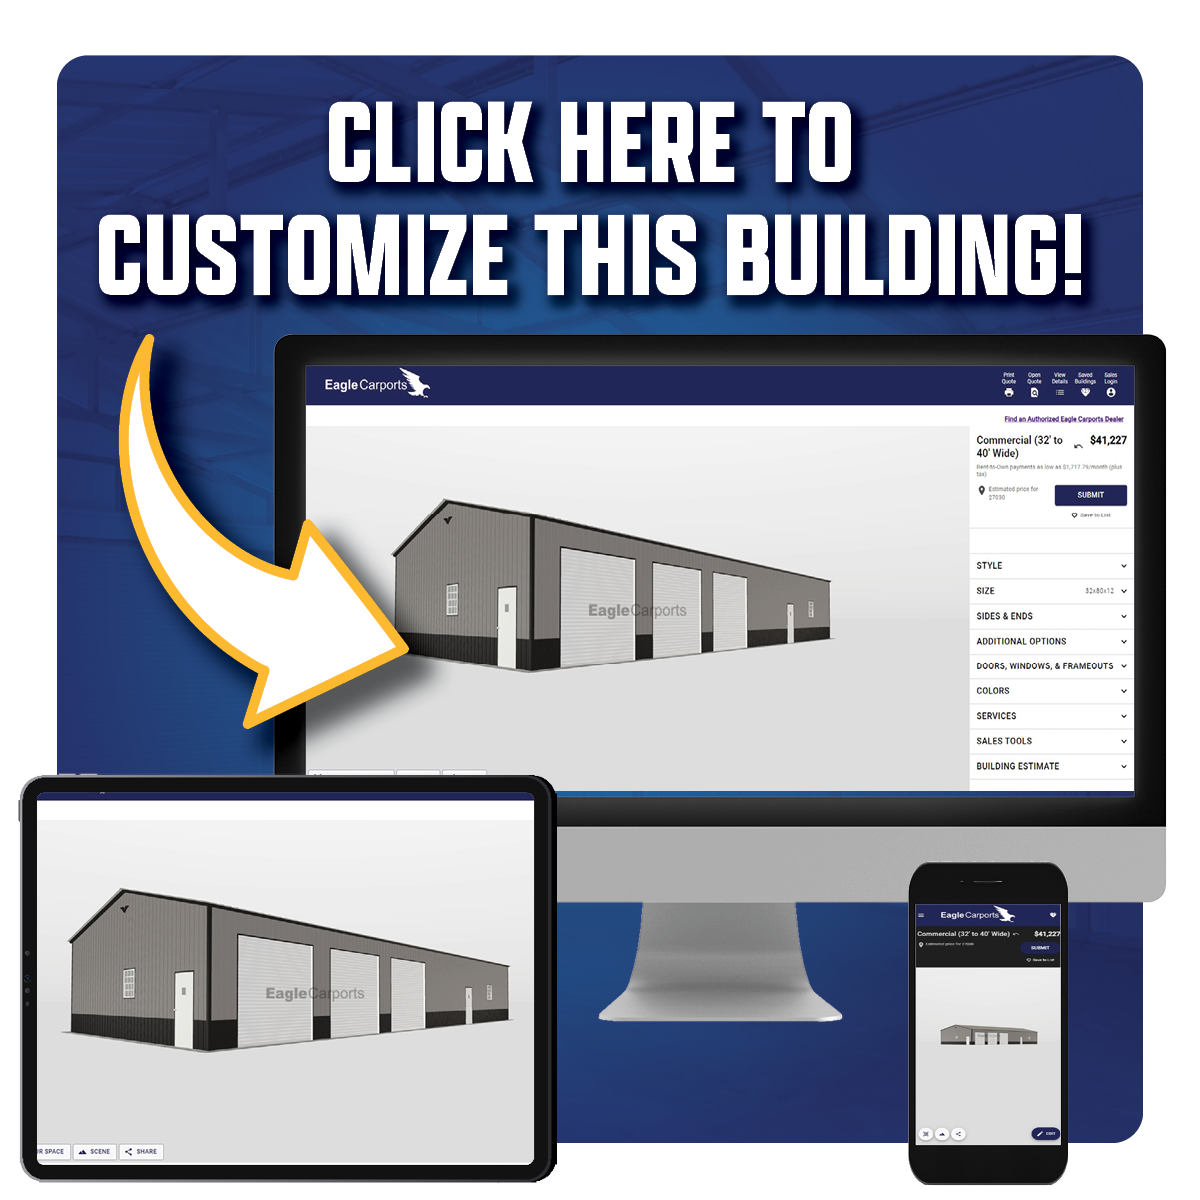 Customize this building in our 3D Builder